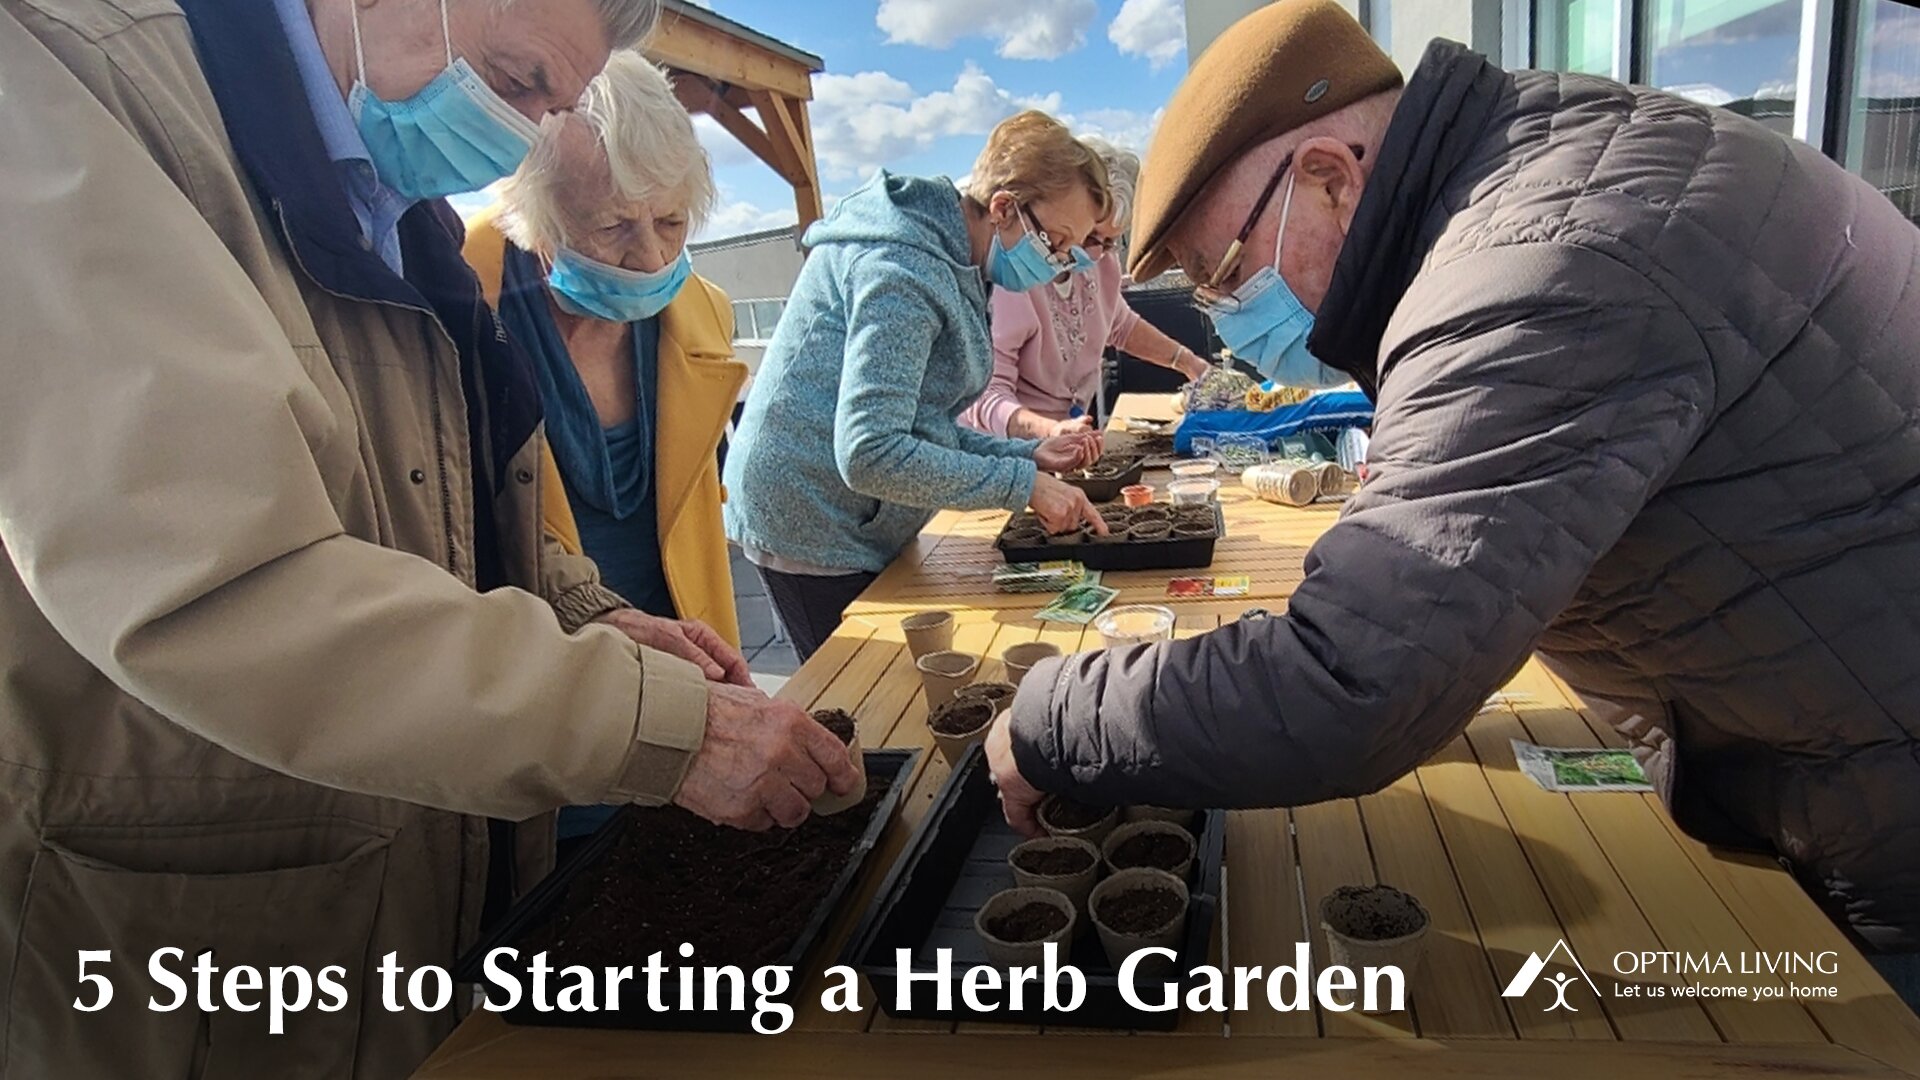 A gathering of men and women planting herbs in the garden, fun activities for seniors